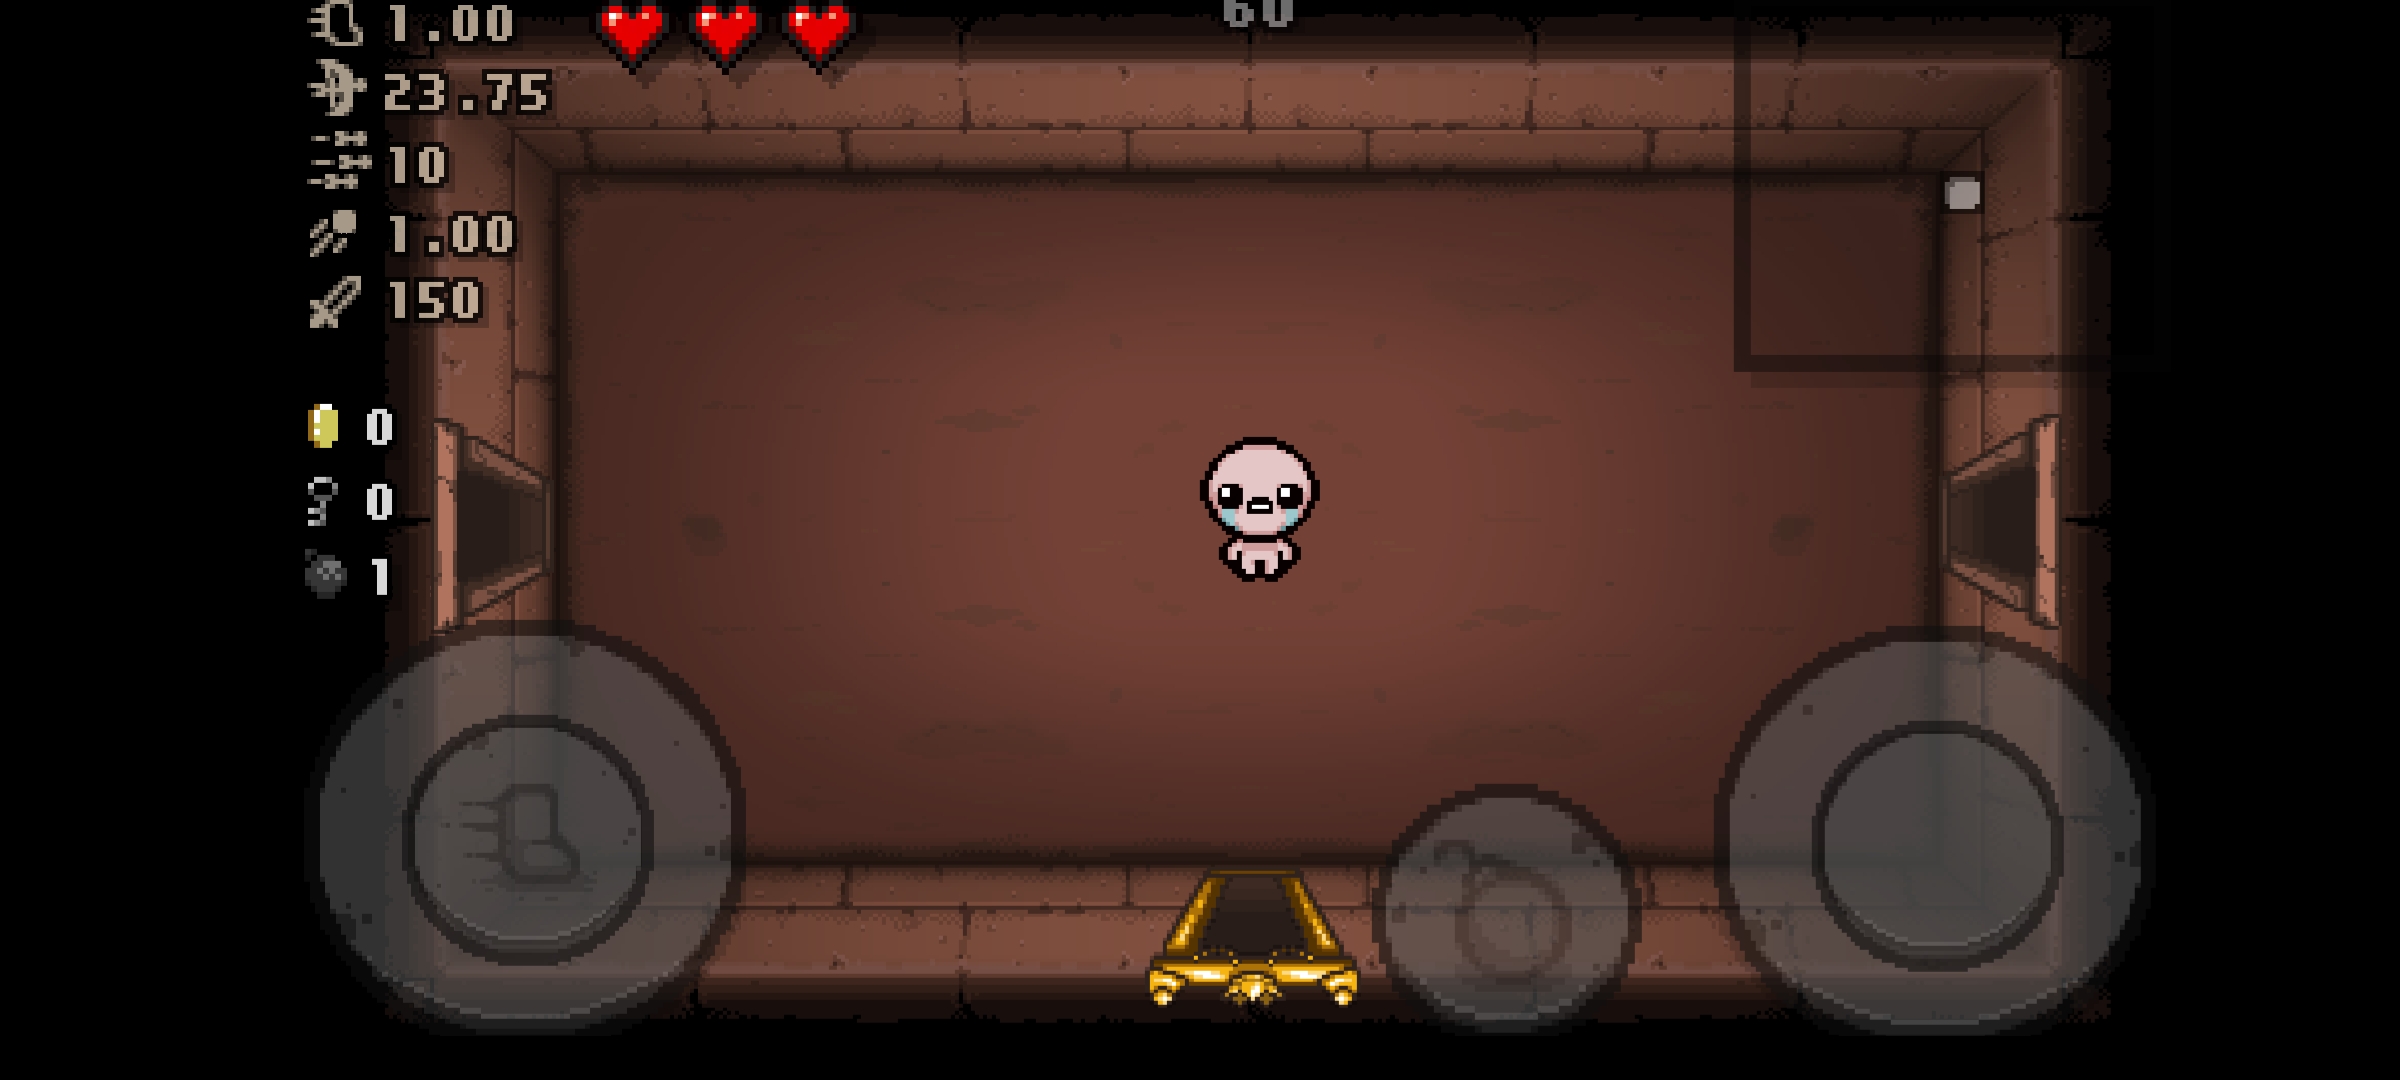 Ľ׿ֲ(Isaac android)v1.3 °